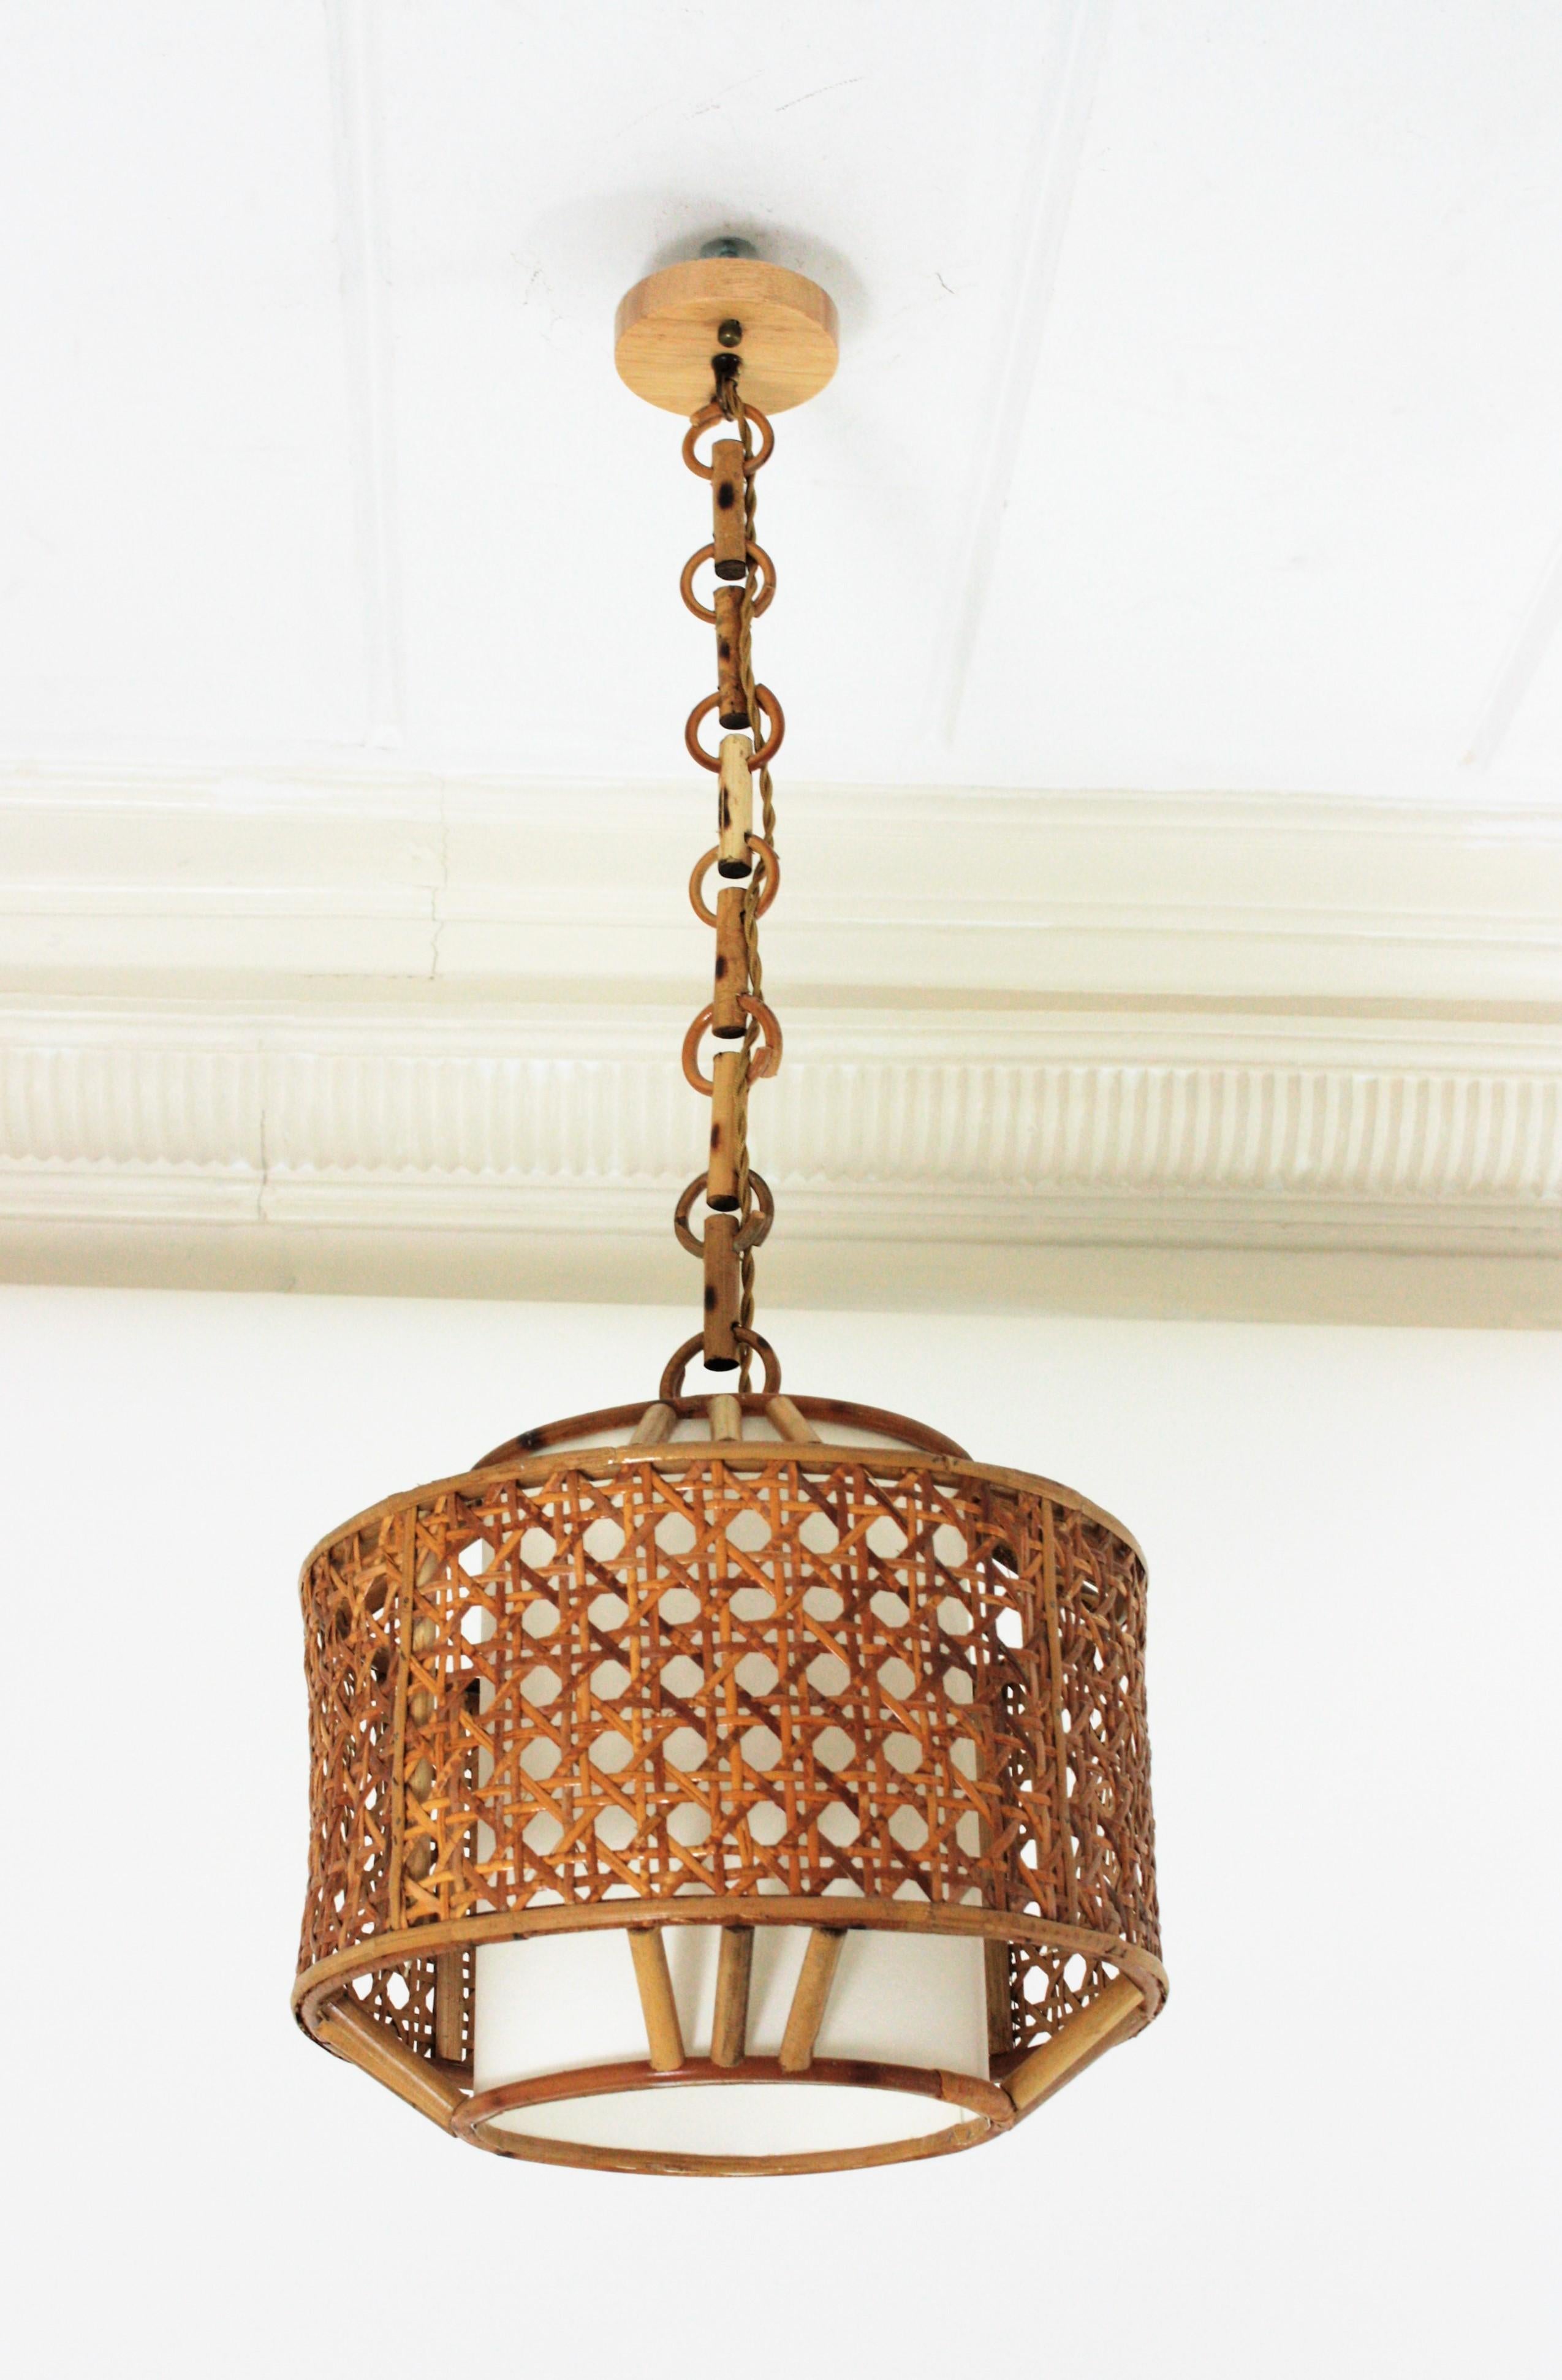 Spanish 1960s Mid-Century Modern bamboo and wicker wire pendant lamp or lantern.
This suspension lamp features a woven wicker drum shaped lampshade with triple bamboo sticks decorations. It has an interior cylindrical paper lampshade to diffuse the